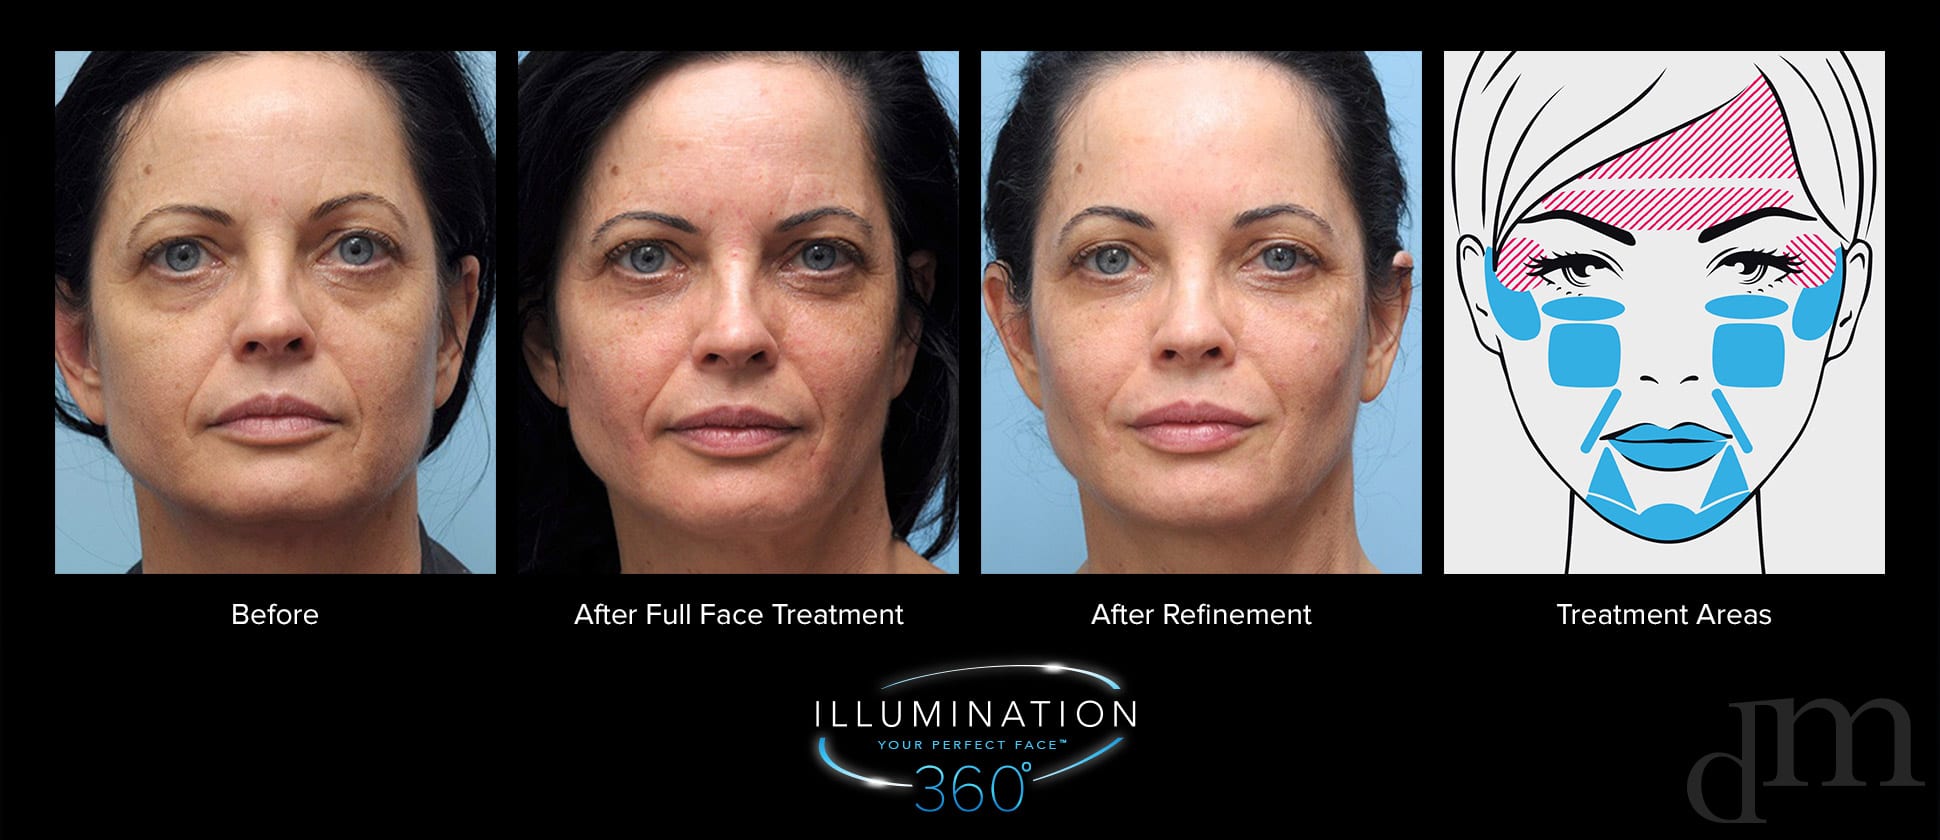 Middle aged woman before and after full face treatment, after refinement treatment, and diagram of treatment areas.